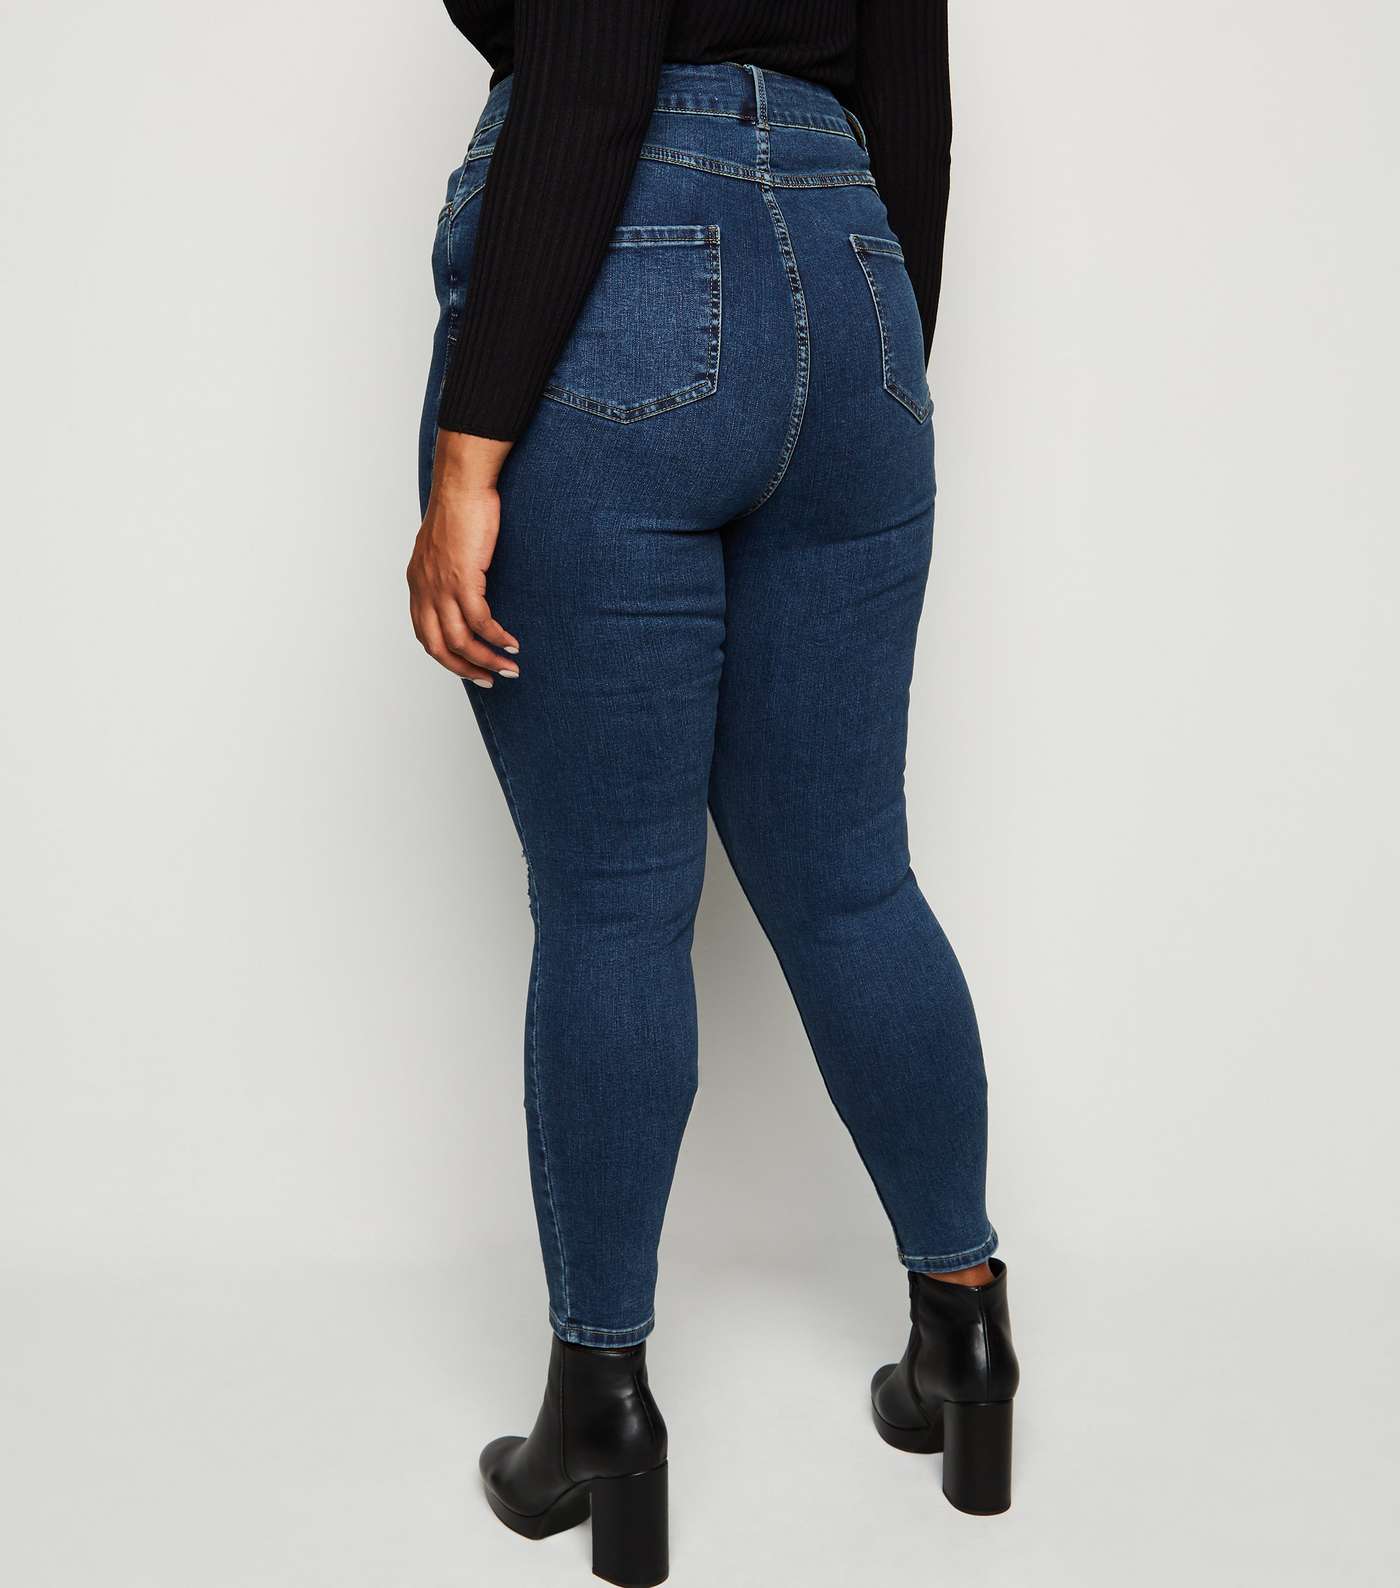 Curves Blue 'Lift & Shape' Ripped Skinny Jeans Image 3